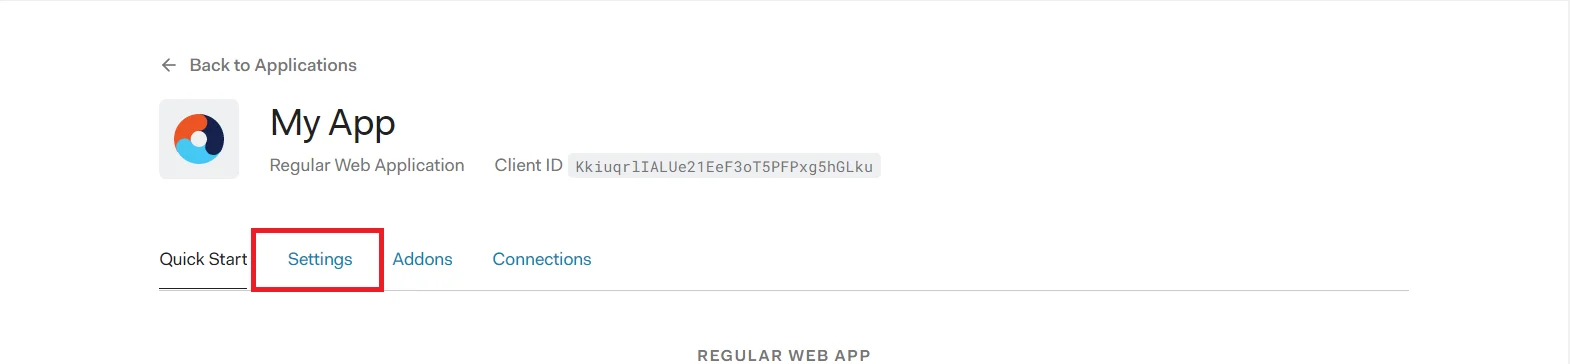 OAuth/OpenID/OIDC Single Sign-On (SSO), Auth0 SSO Login go to setting